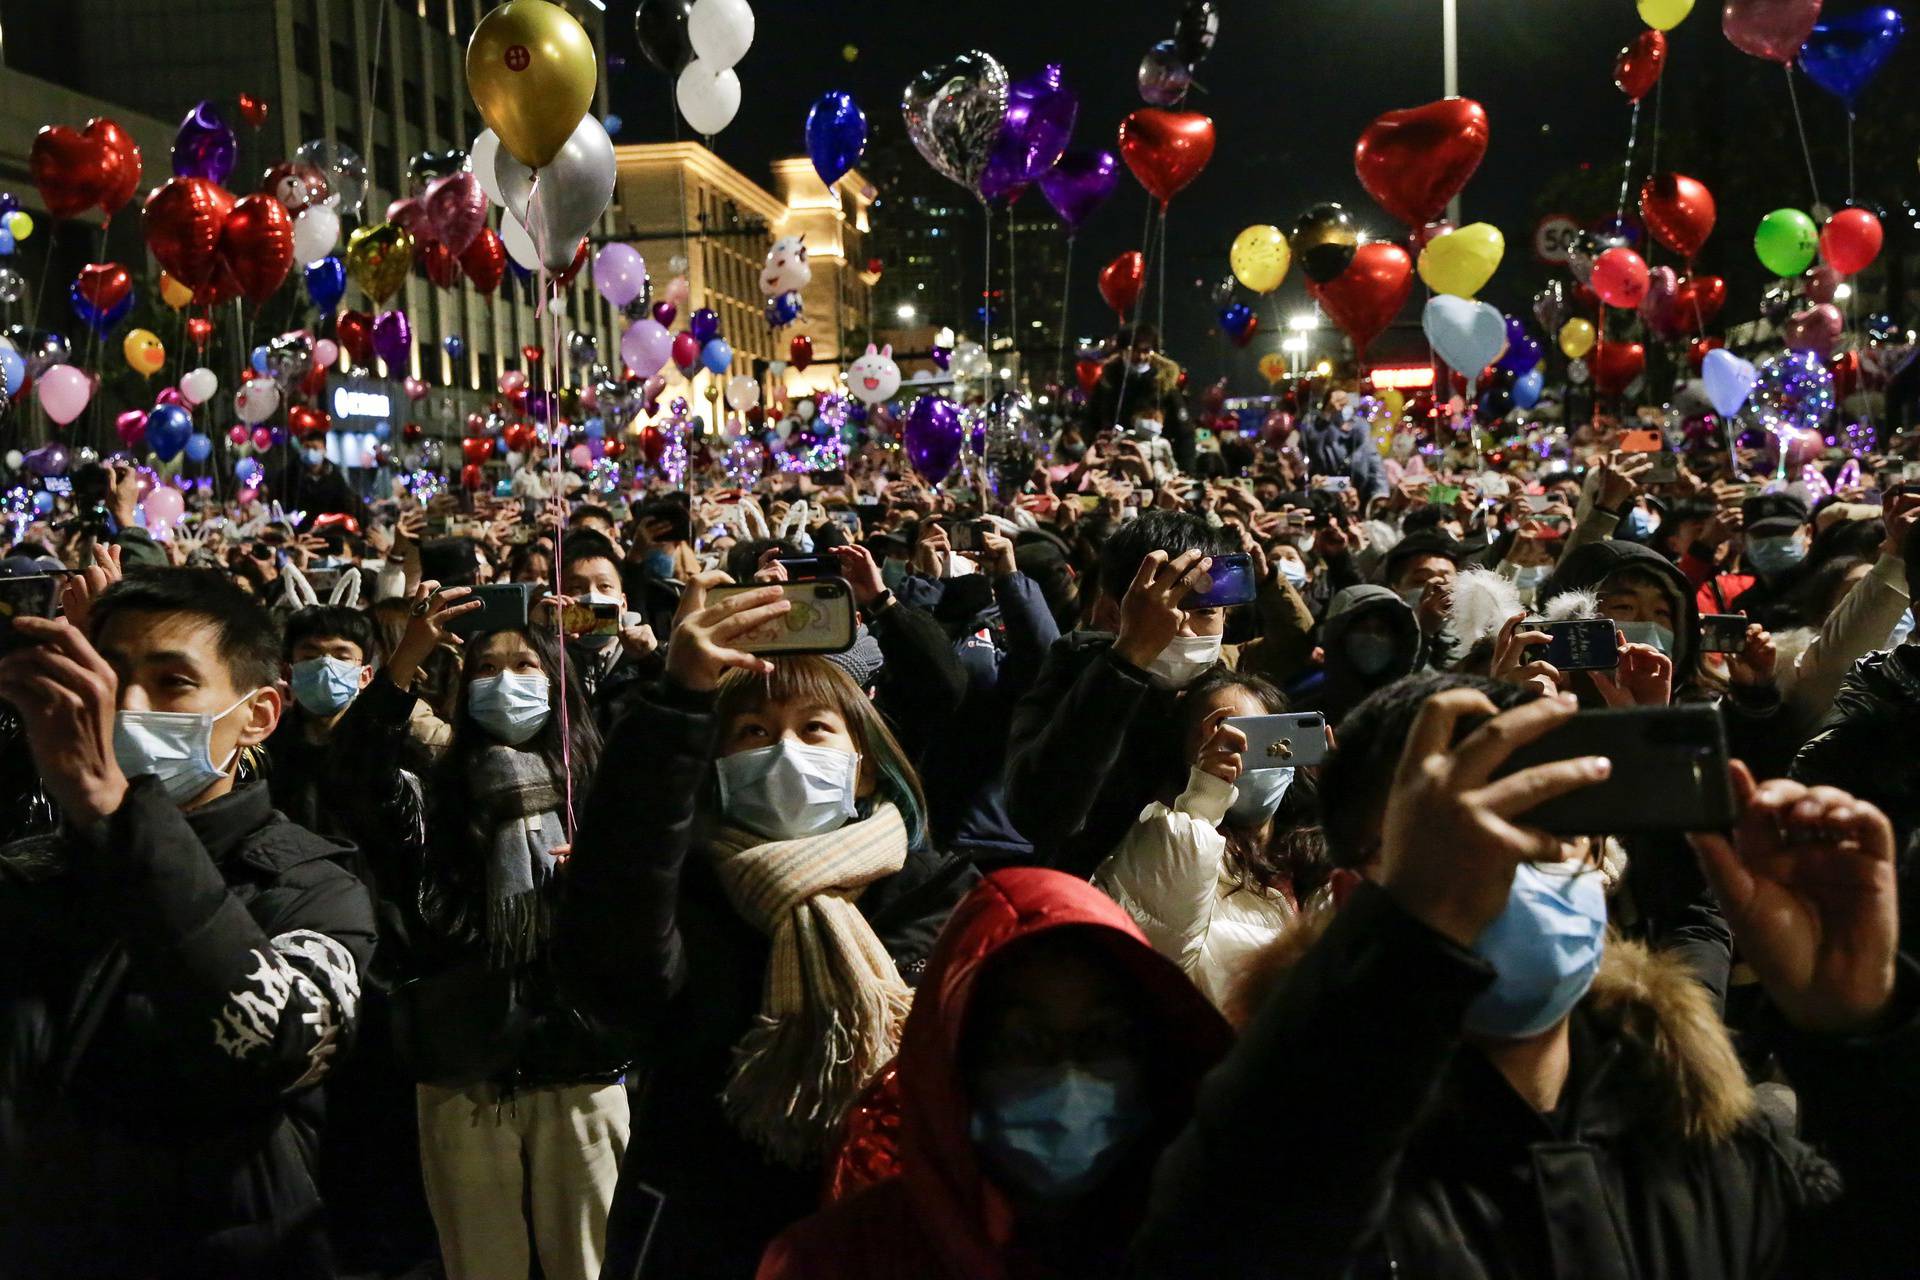 New Year's Eve celebrations in Wuhan